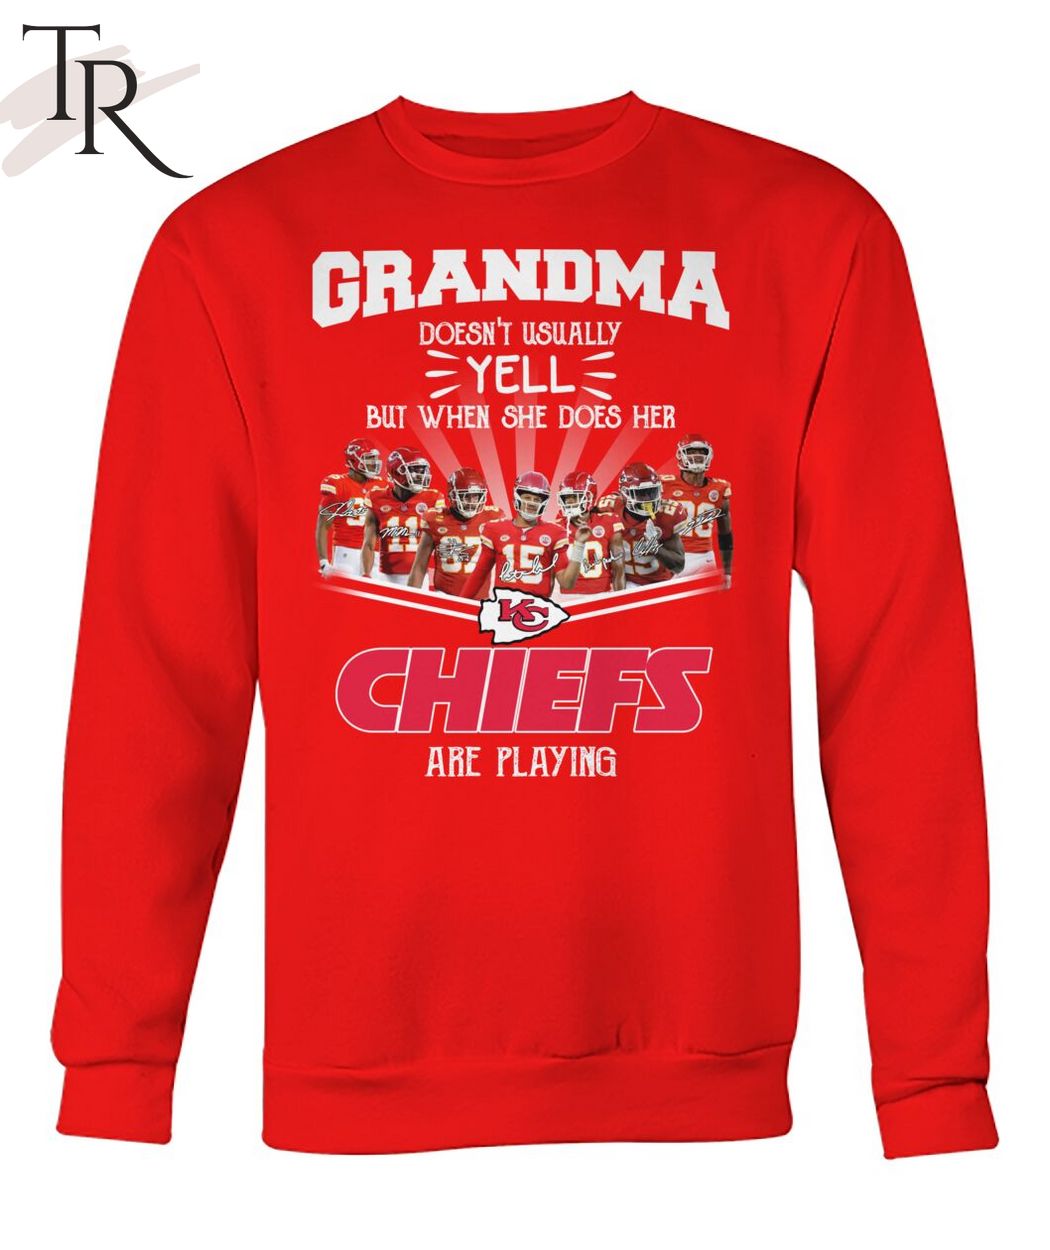 Grandma Doesn't Usually Yell But When She Does Her Chiefs Are Playing T-Shirt